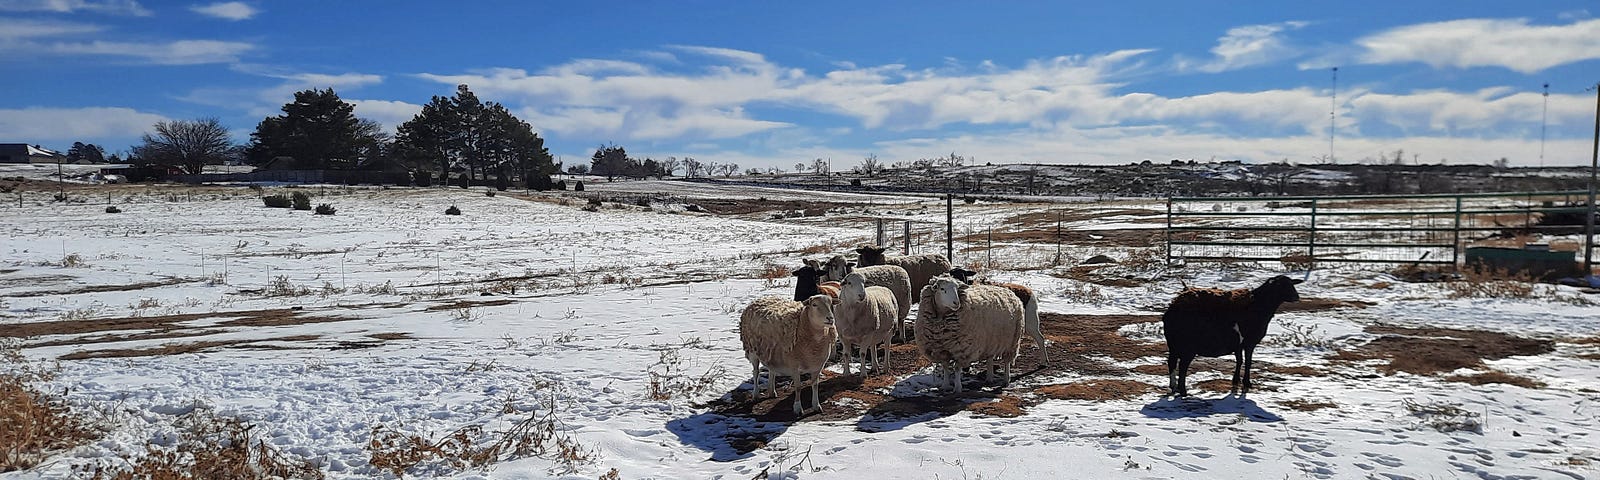 A small flock of sheep standing in the snow against a very blue sky